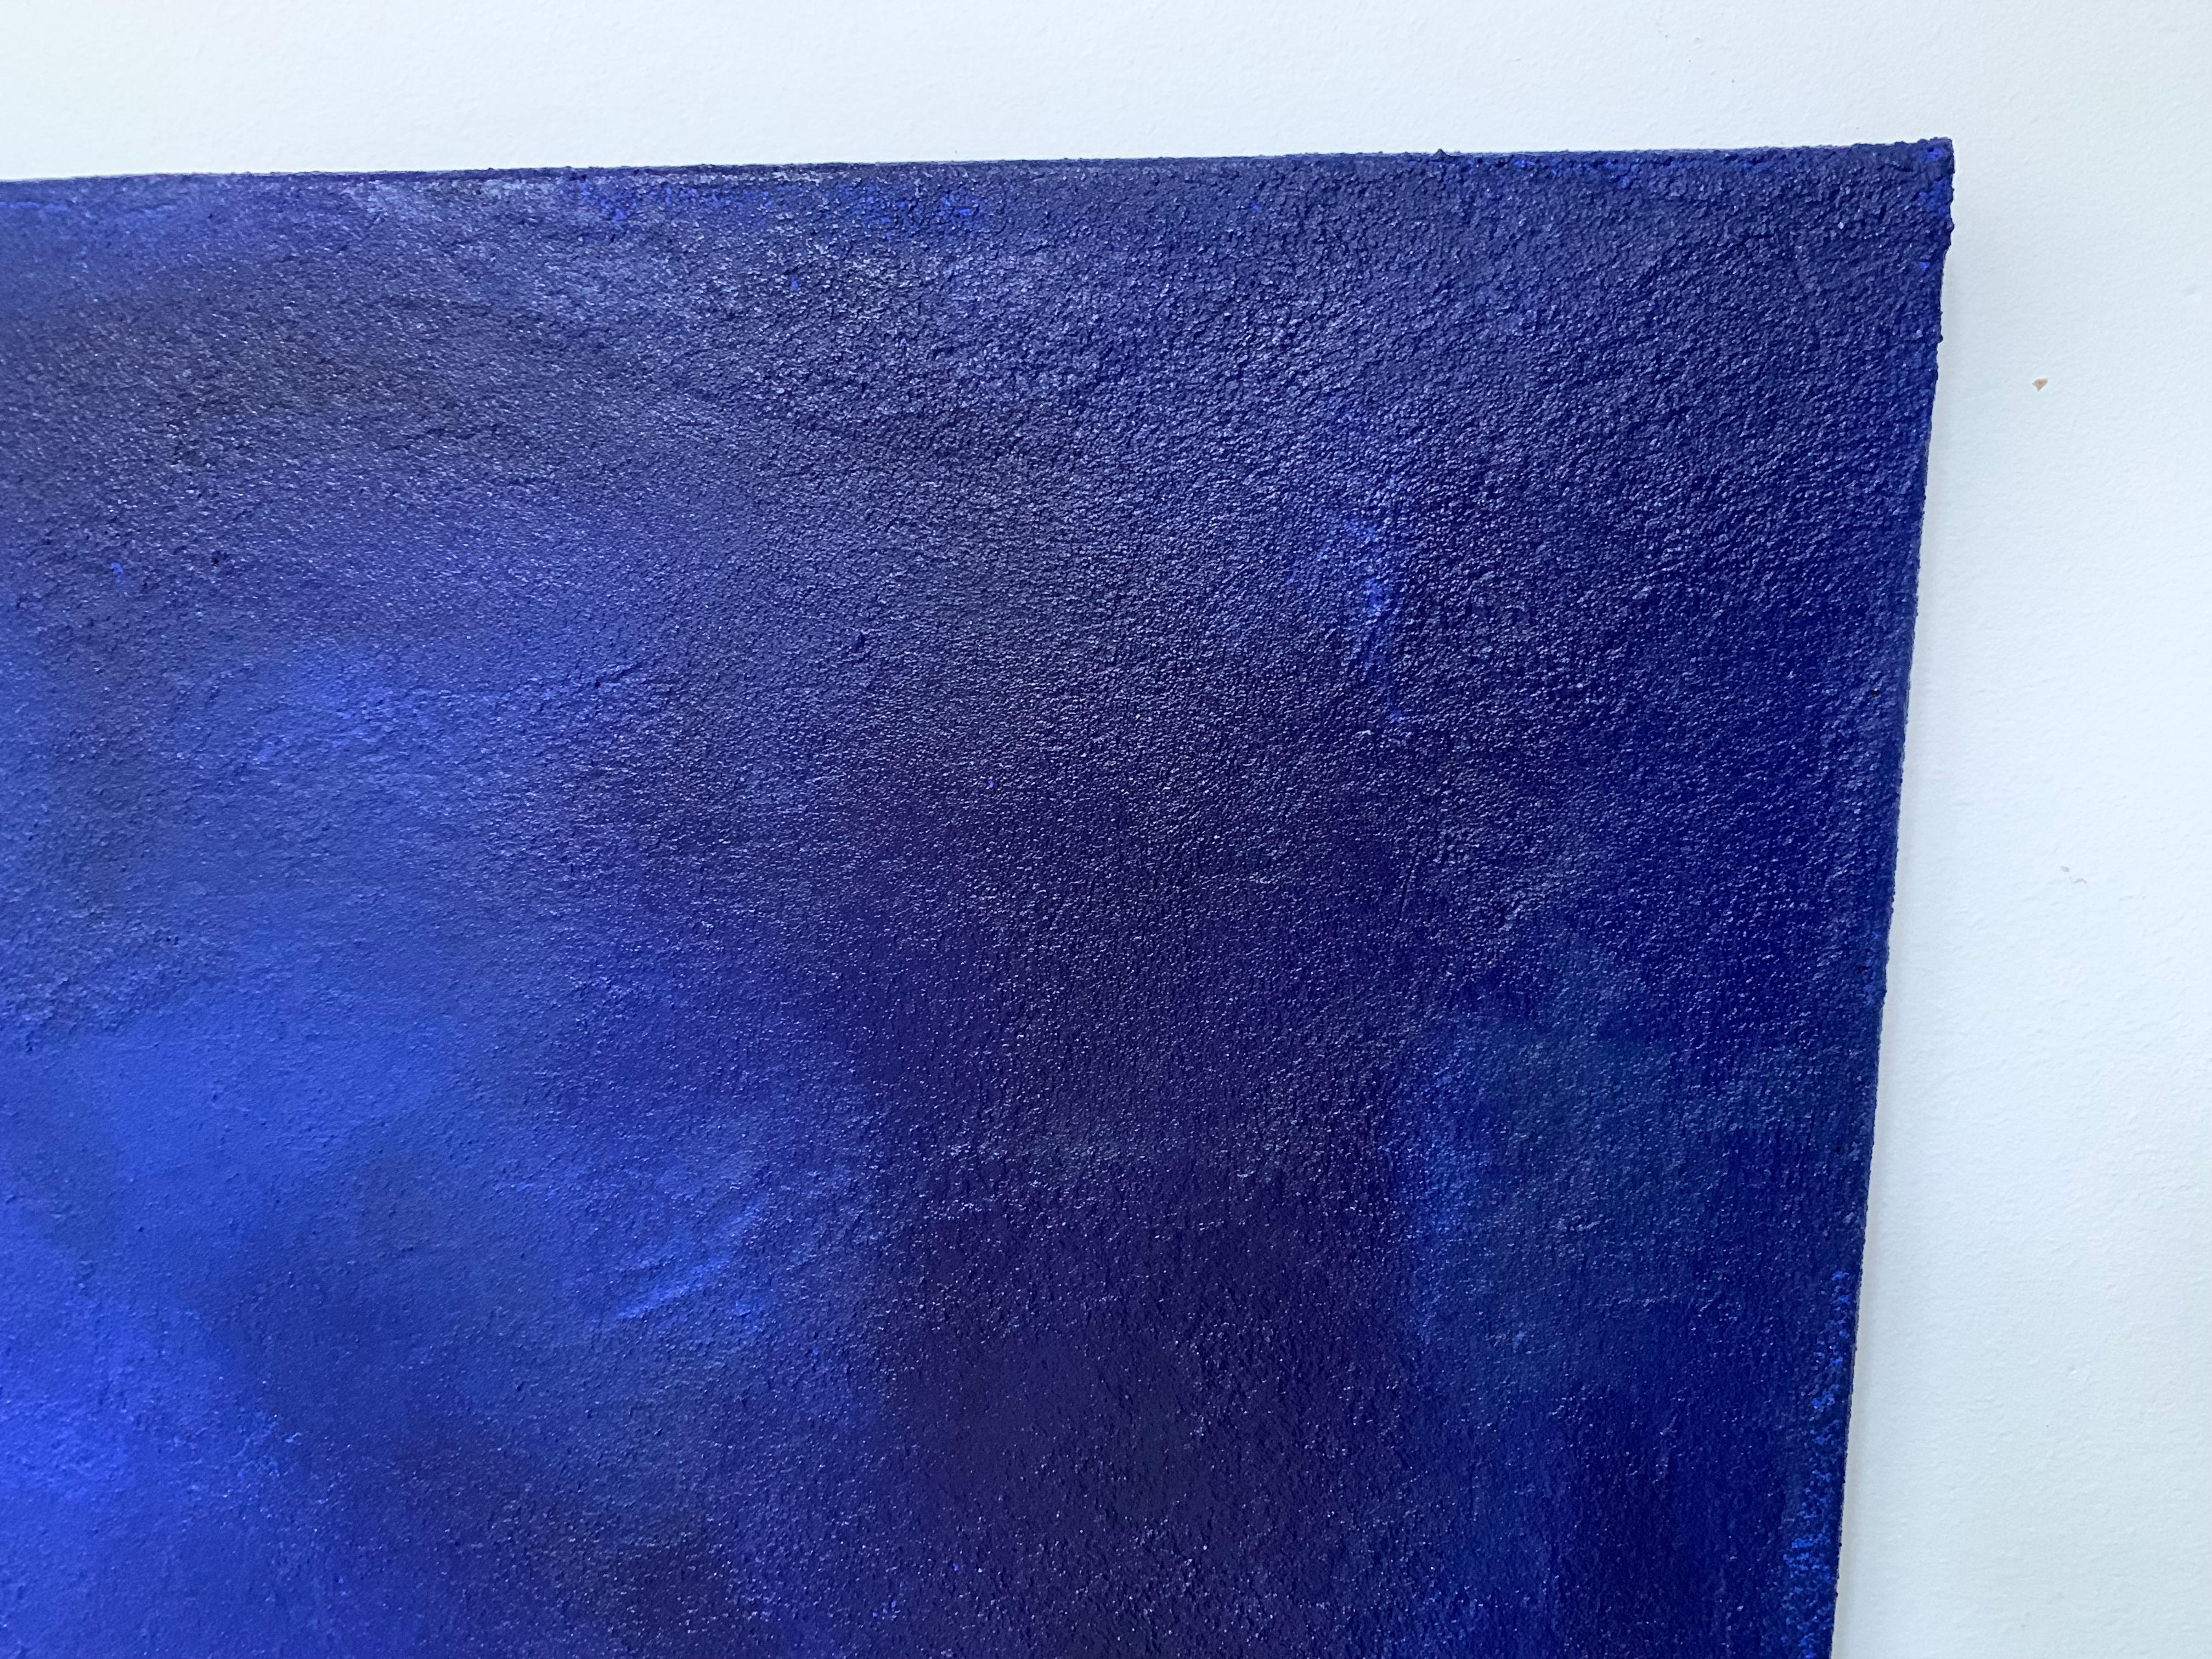 Blue and Violet Sand Effect Abstract Textured Painting 10